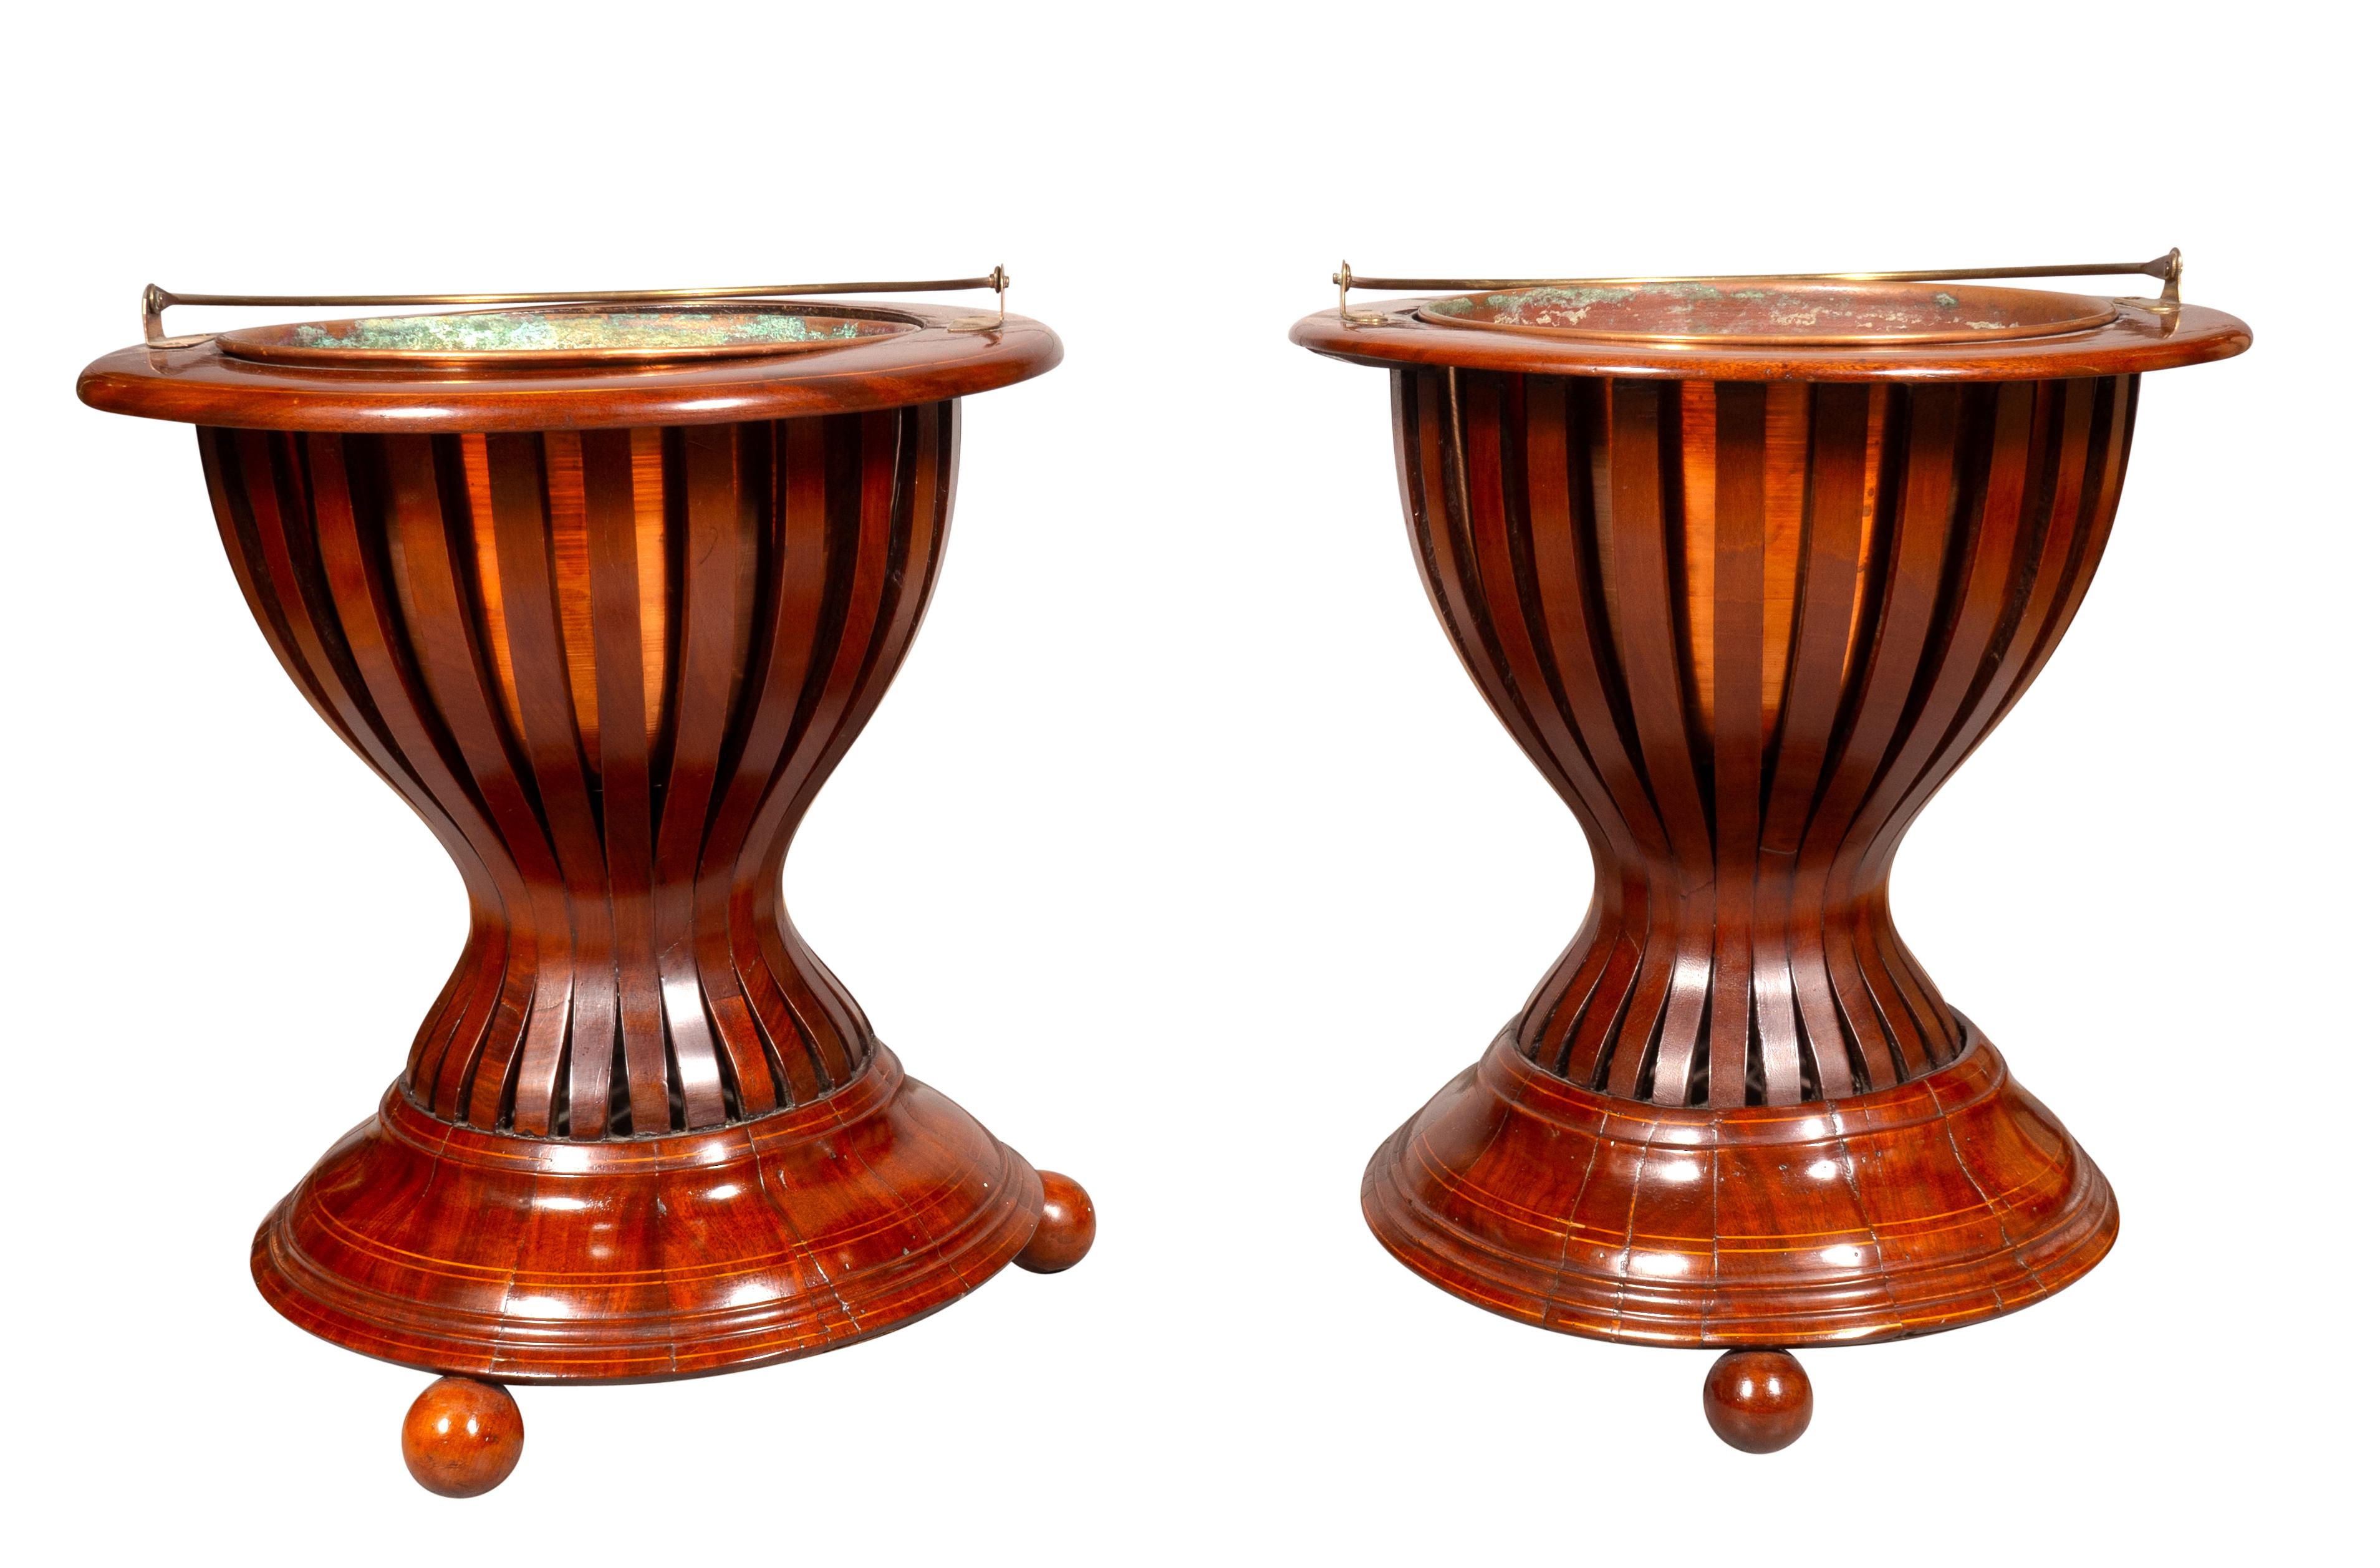 Each with brass liners and brass bail handles. Urn shaped with open slat work and circular base with ball feet.